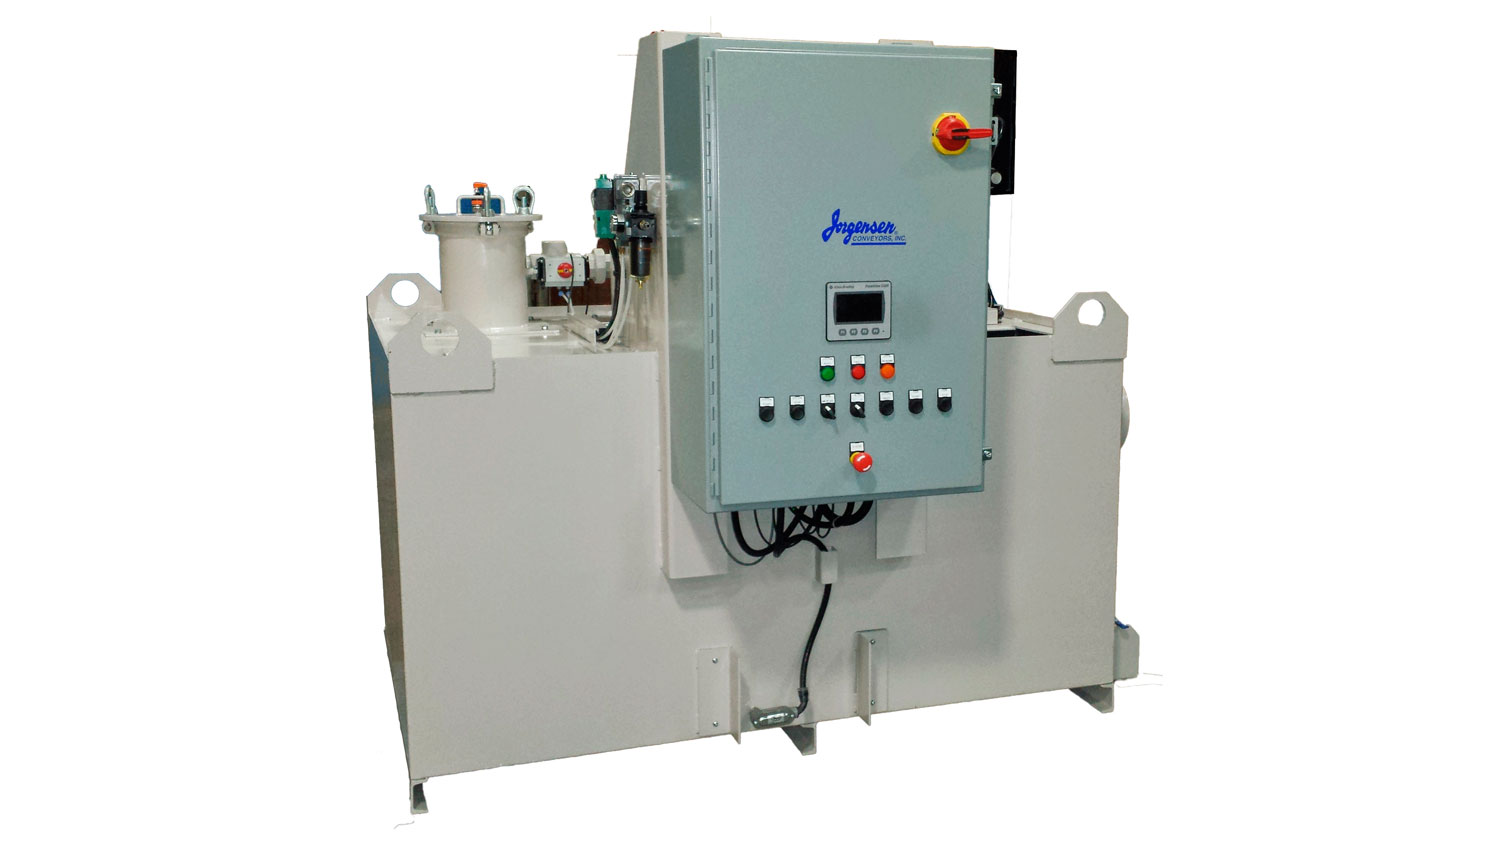 A high pressure coolant filter system pumps coolant into your machine tool